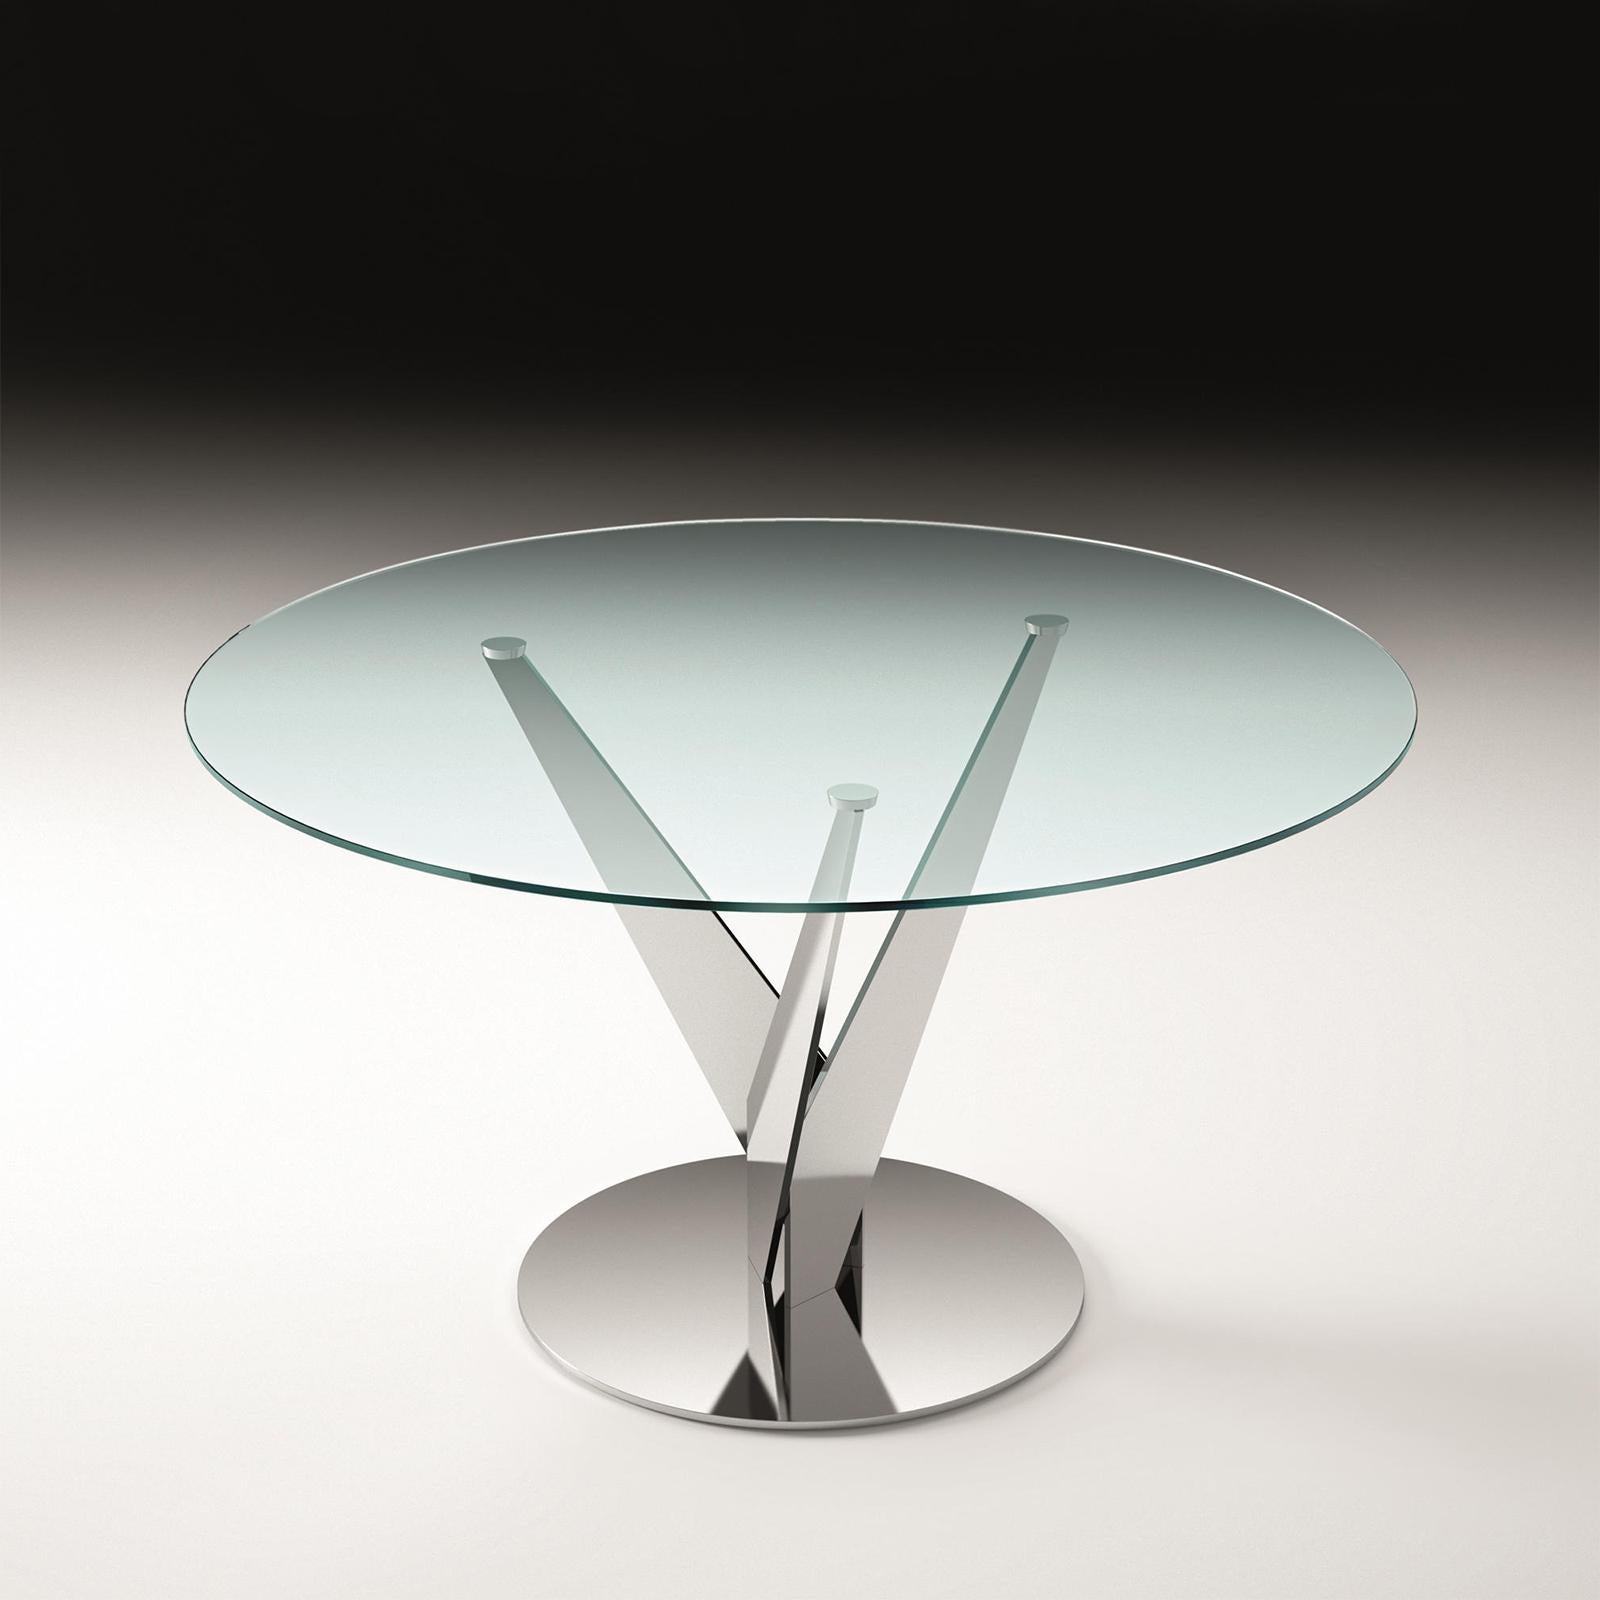 Table ellipse chrome with tempered clear glass 
top, 10mm thickness. With chromed steel feet.
Available in:
Measures: Diameter 120 x H 75cm, price: 6900,00€.
Diameter 140 x H 75cm, price: 7200,00€.


Round table with 10 mm-thick tempered